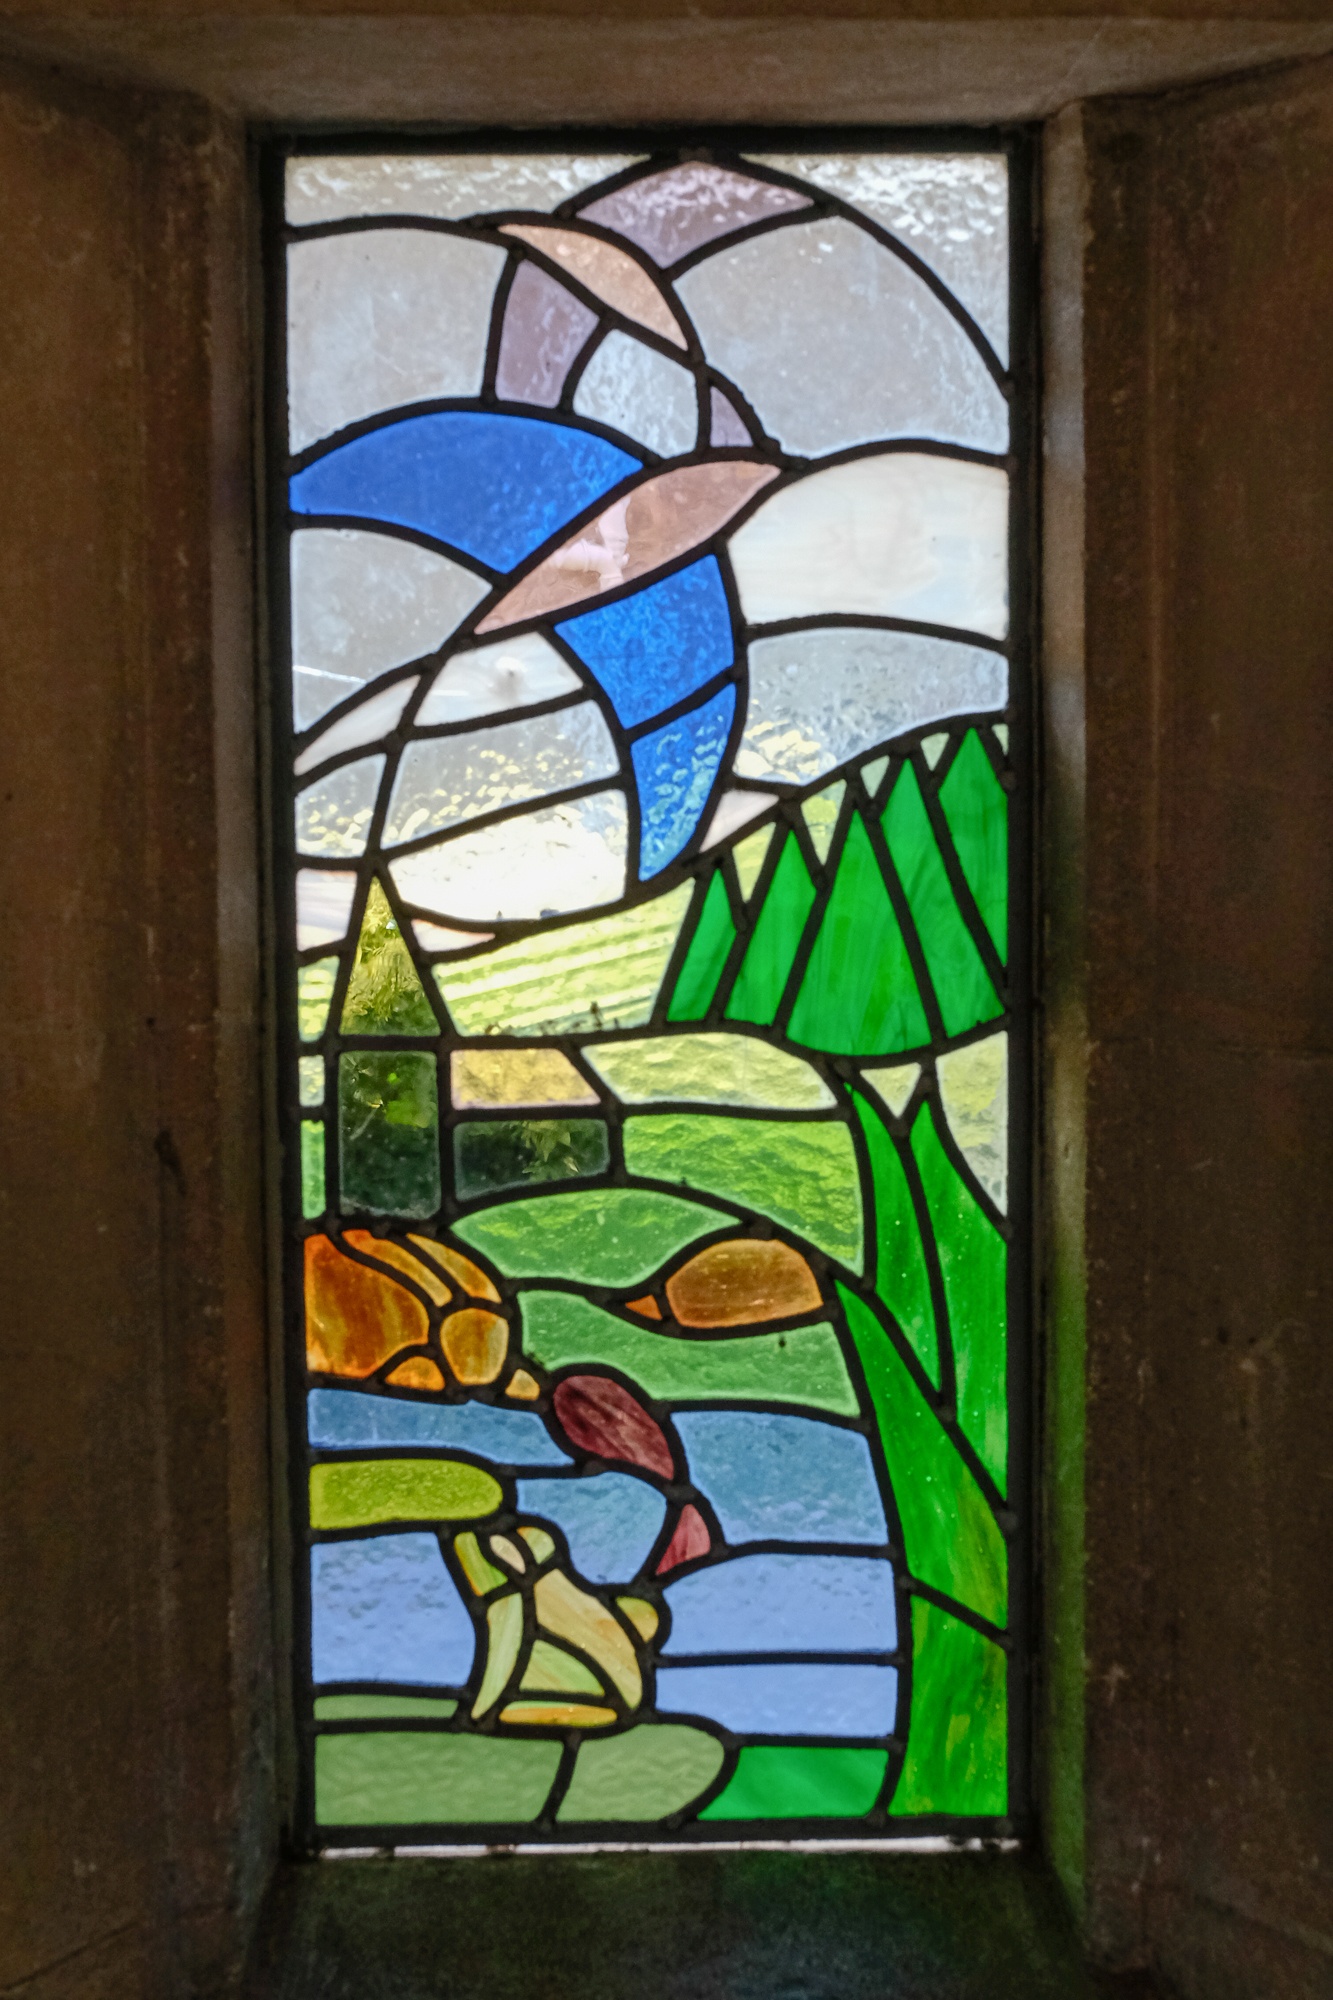 Our Stained Glass Window in the Entrance